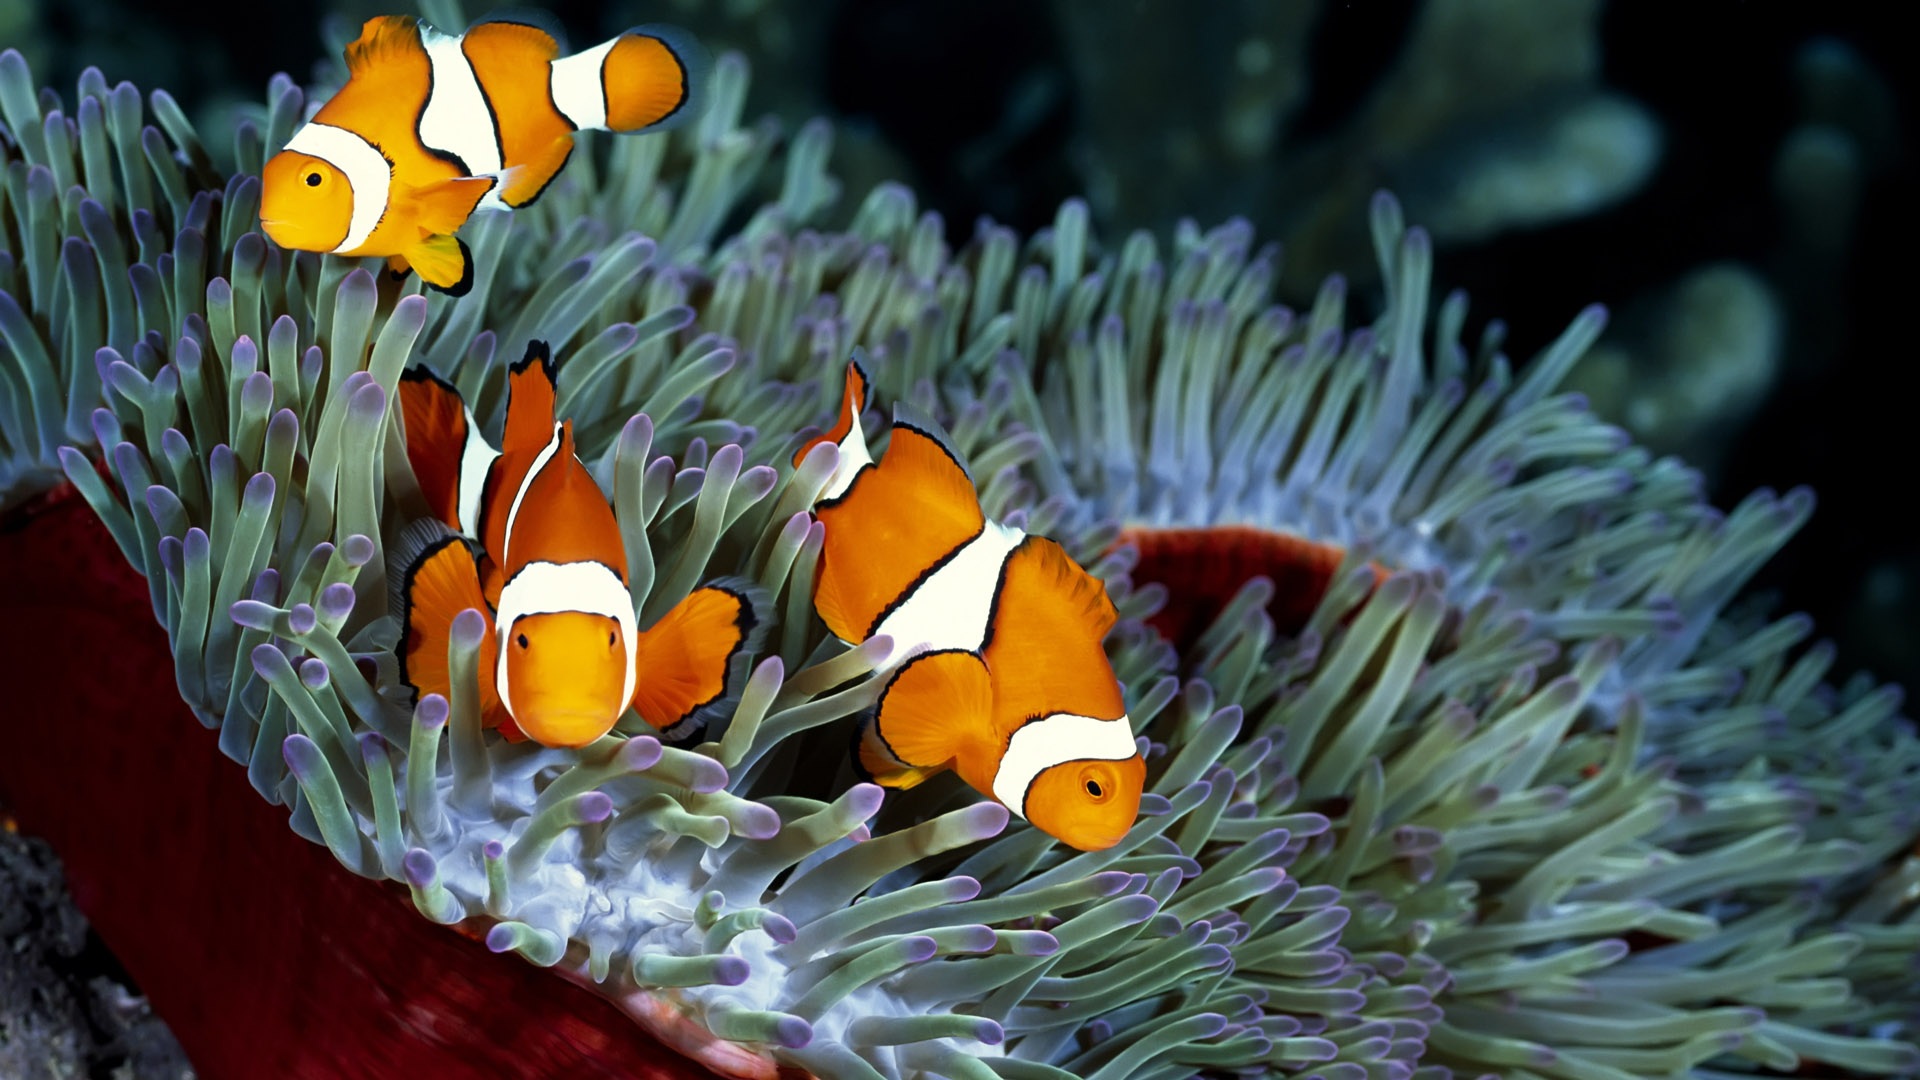 Wallpaper With A Orange Tropical Fish Hd Orange Fish Wallpapers ...